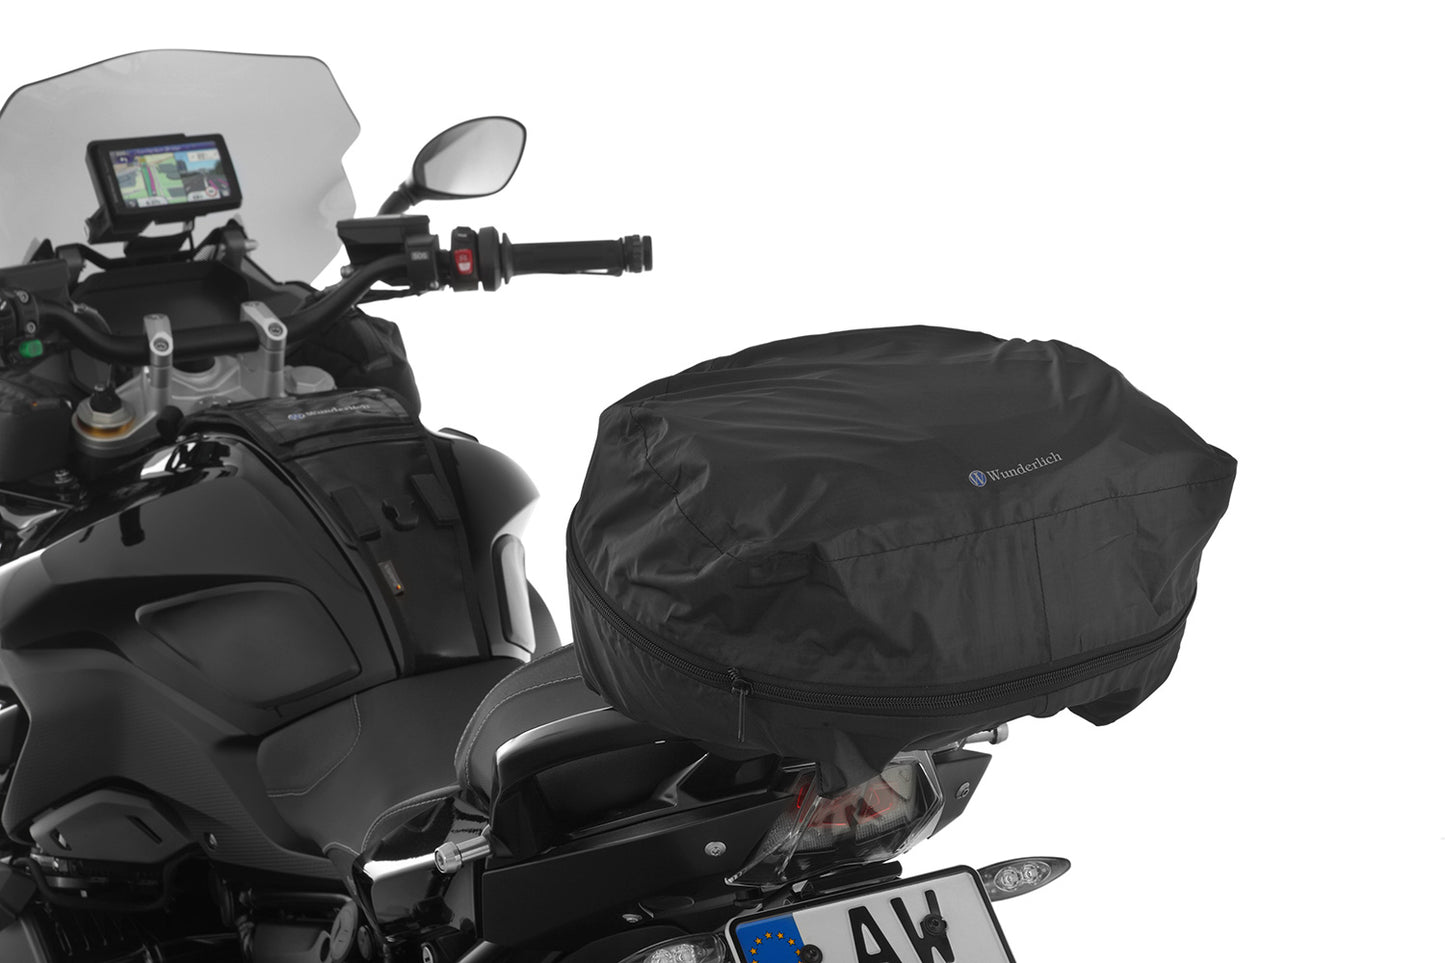 Rain cover Vario for ELEPHANT seat and carrier bag - black